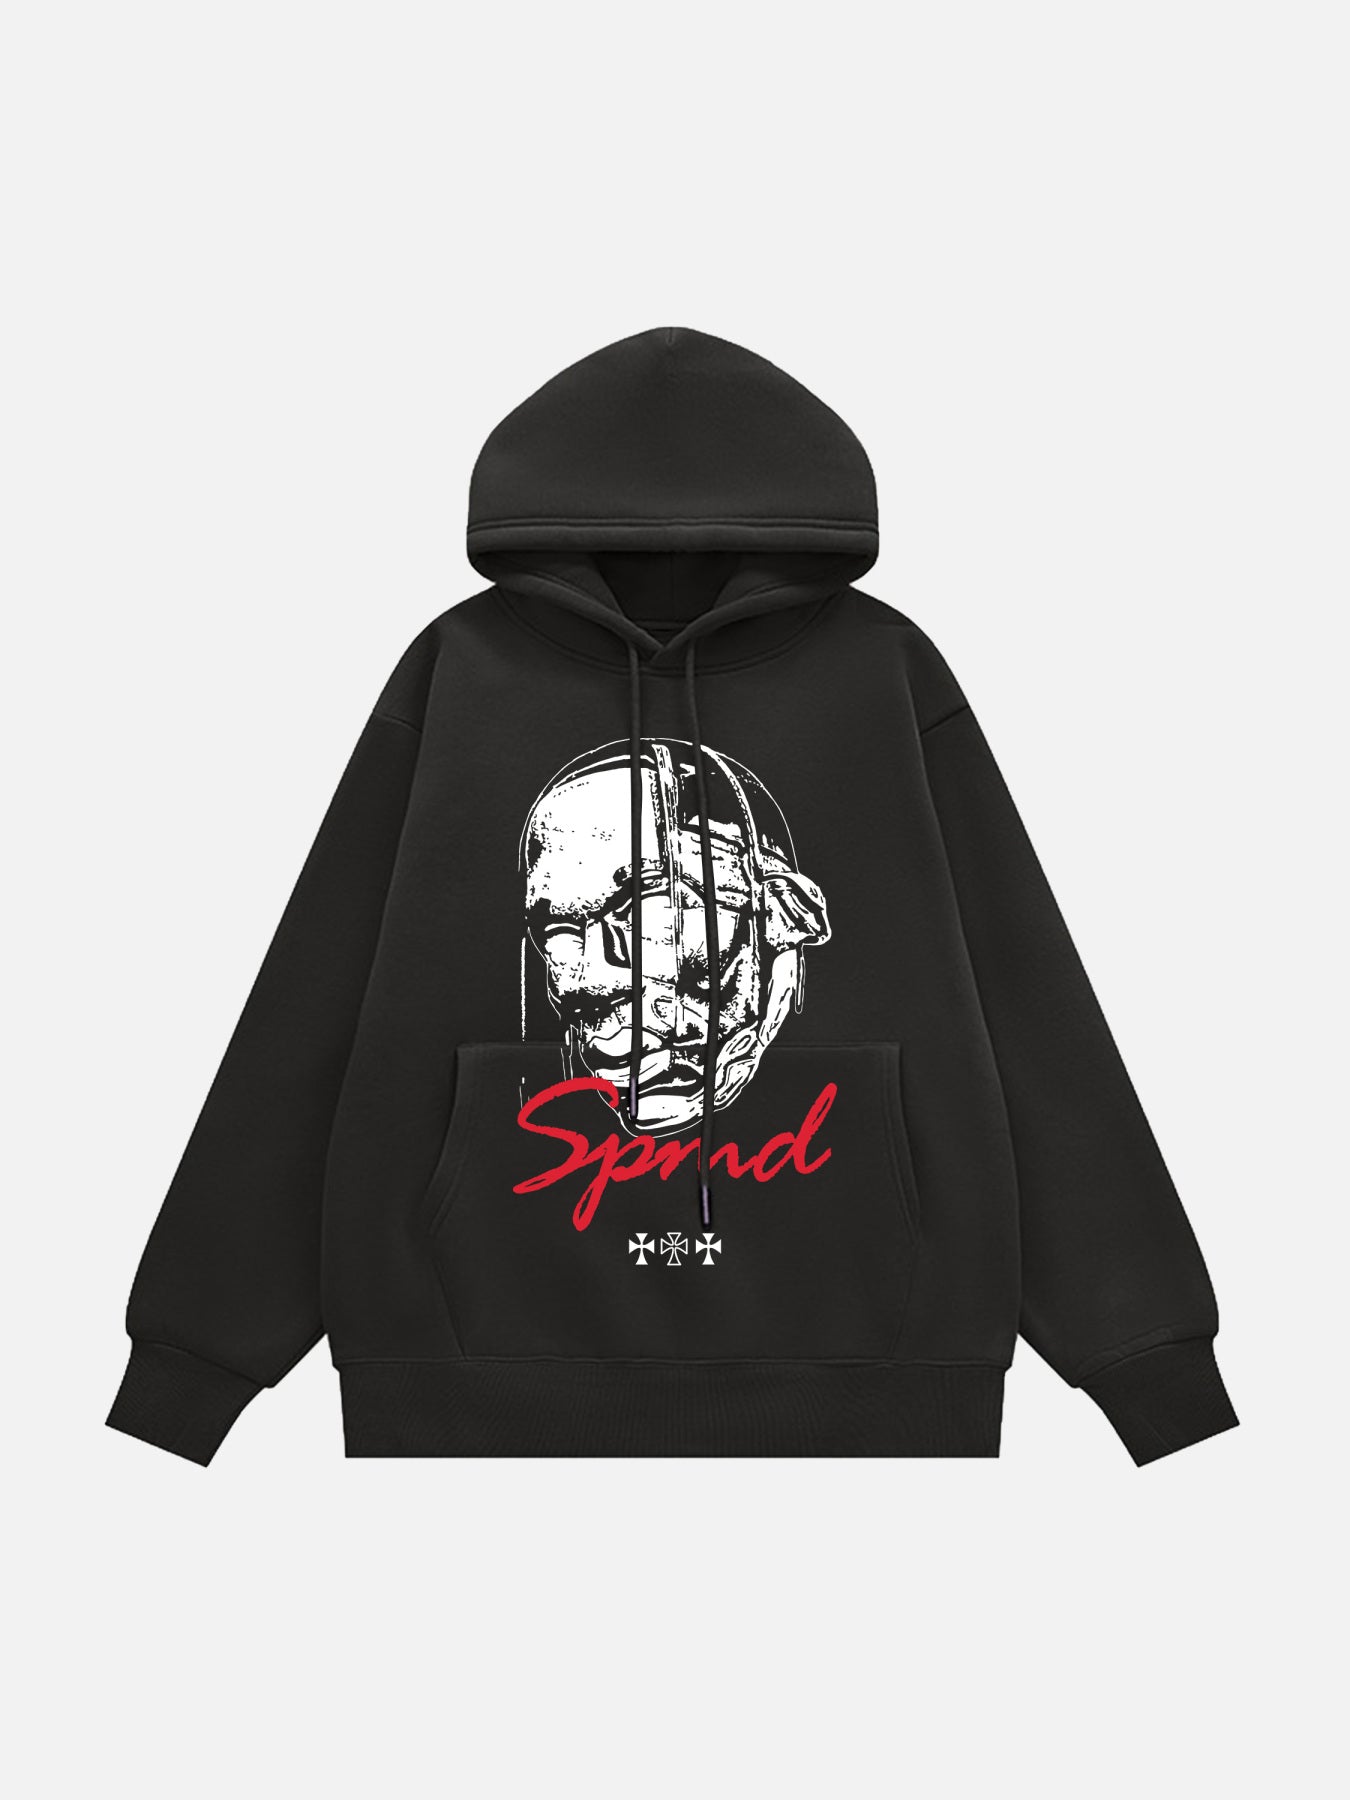 Thesupermade Artistic Creation Avatar Hoodie